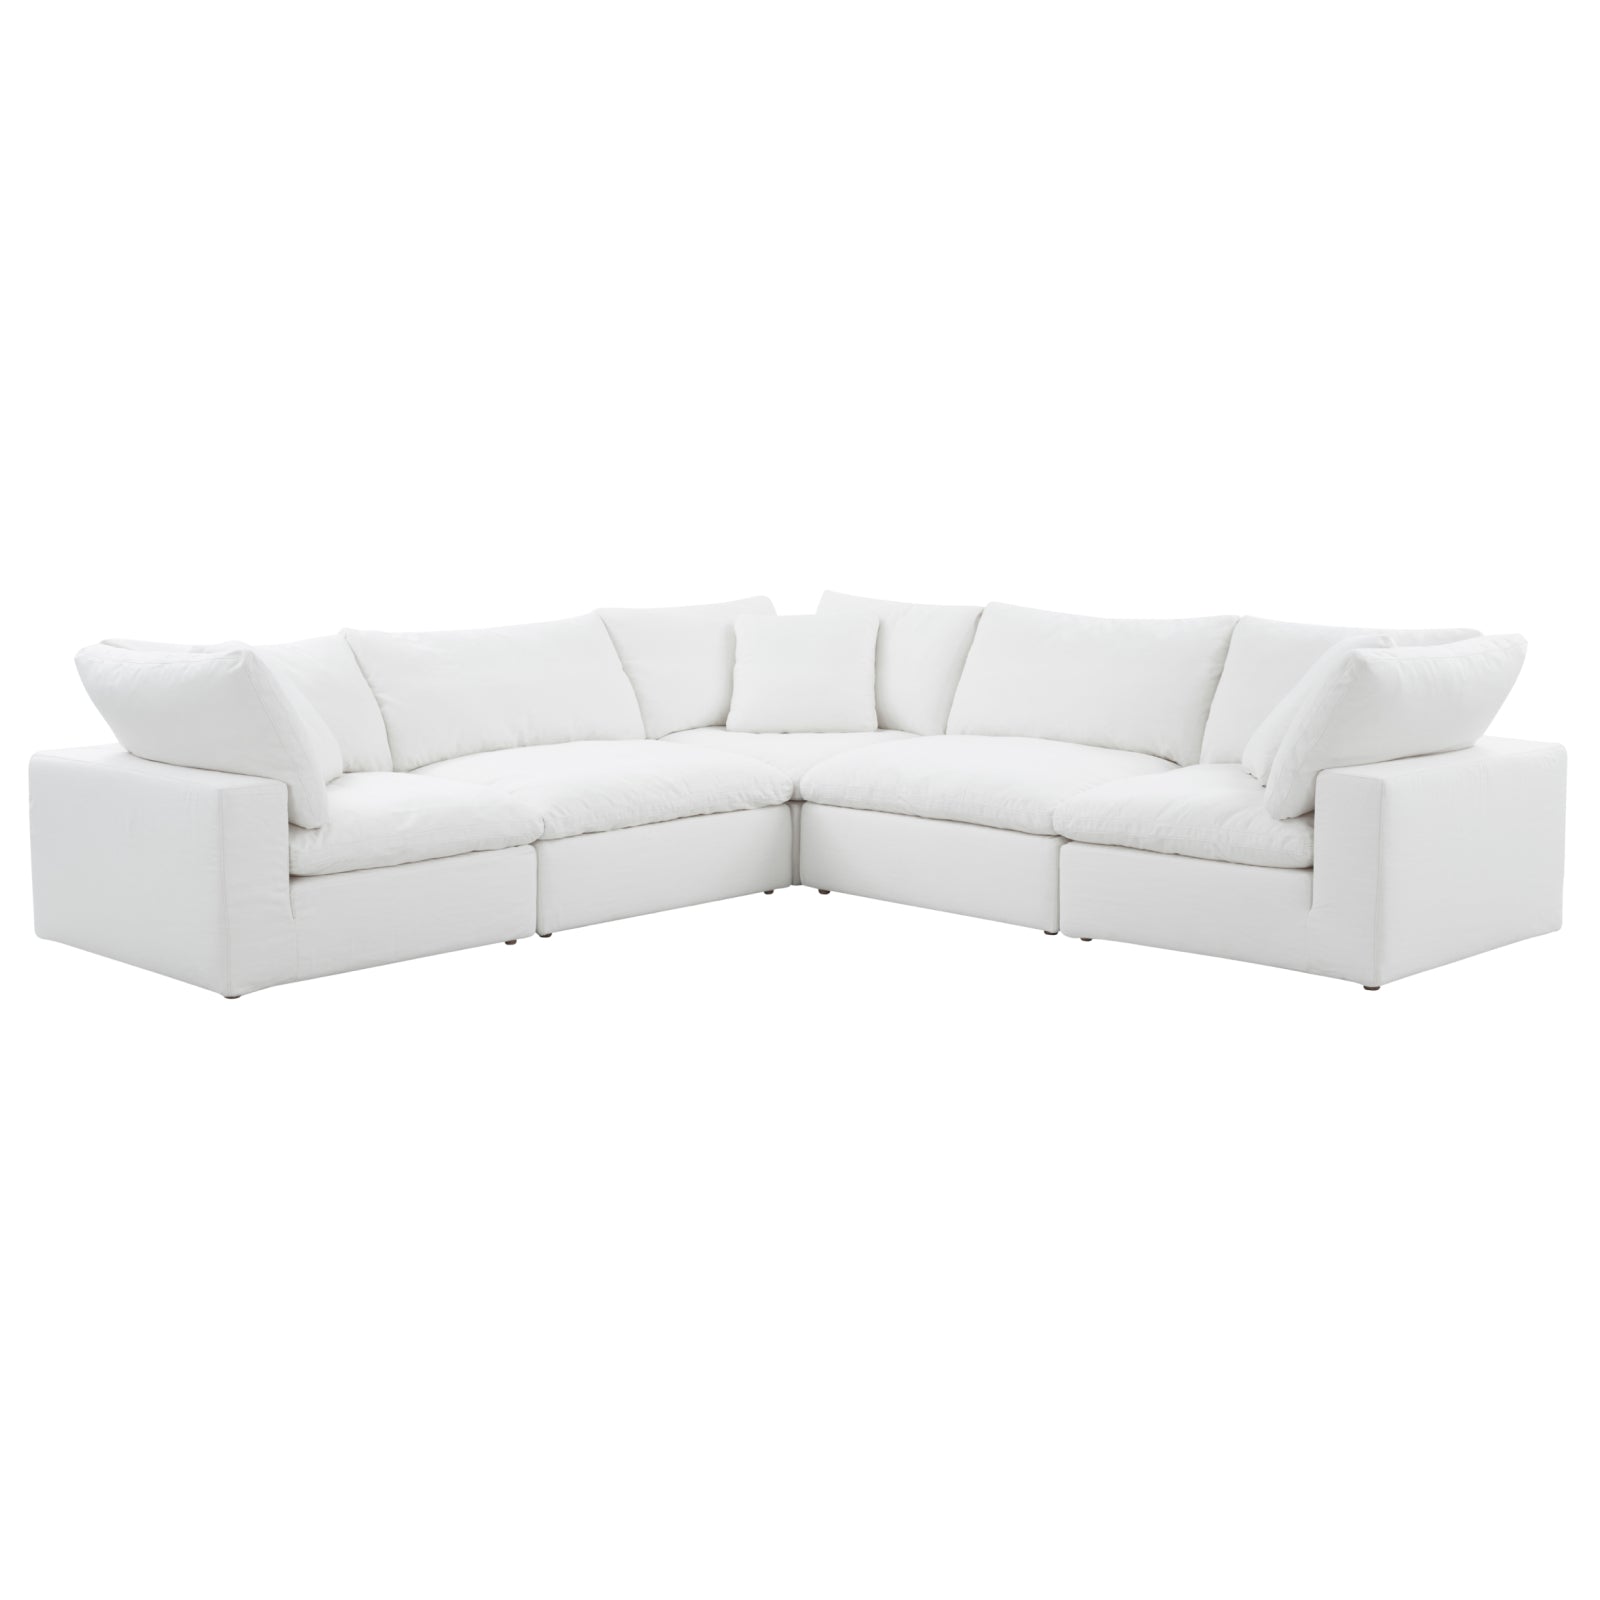 Movie Night™ 5-Piece Modular Sectional Closed, Large, Brie - Image 12